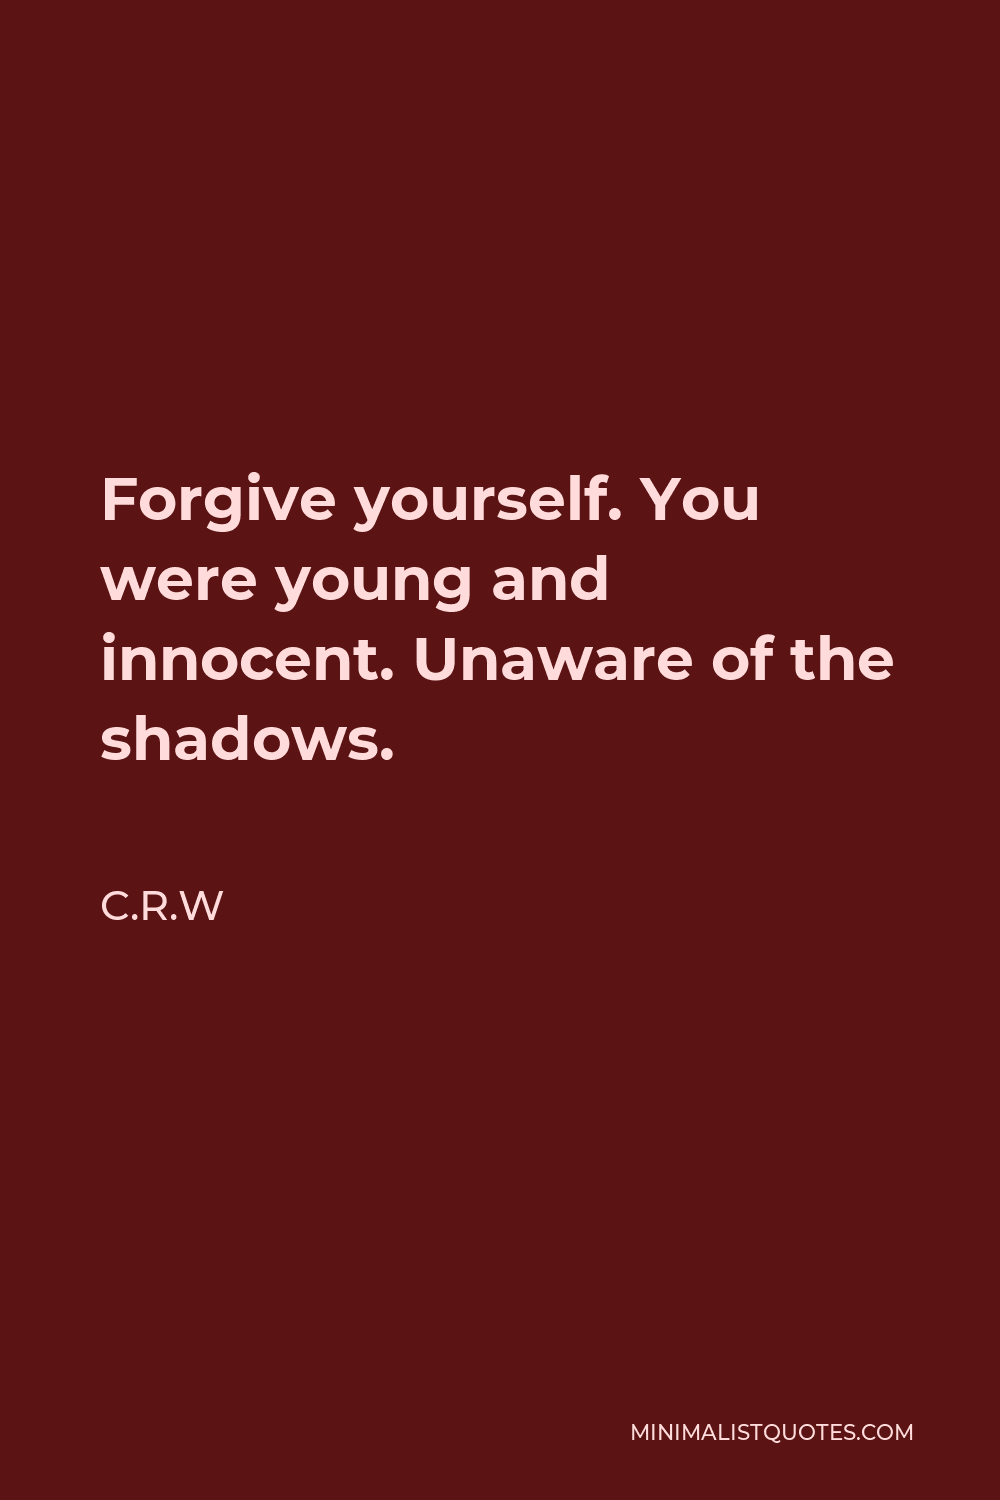 C.R.W Quote - Forgive yourself. You were young and innocent. Unaware of the shadows.